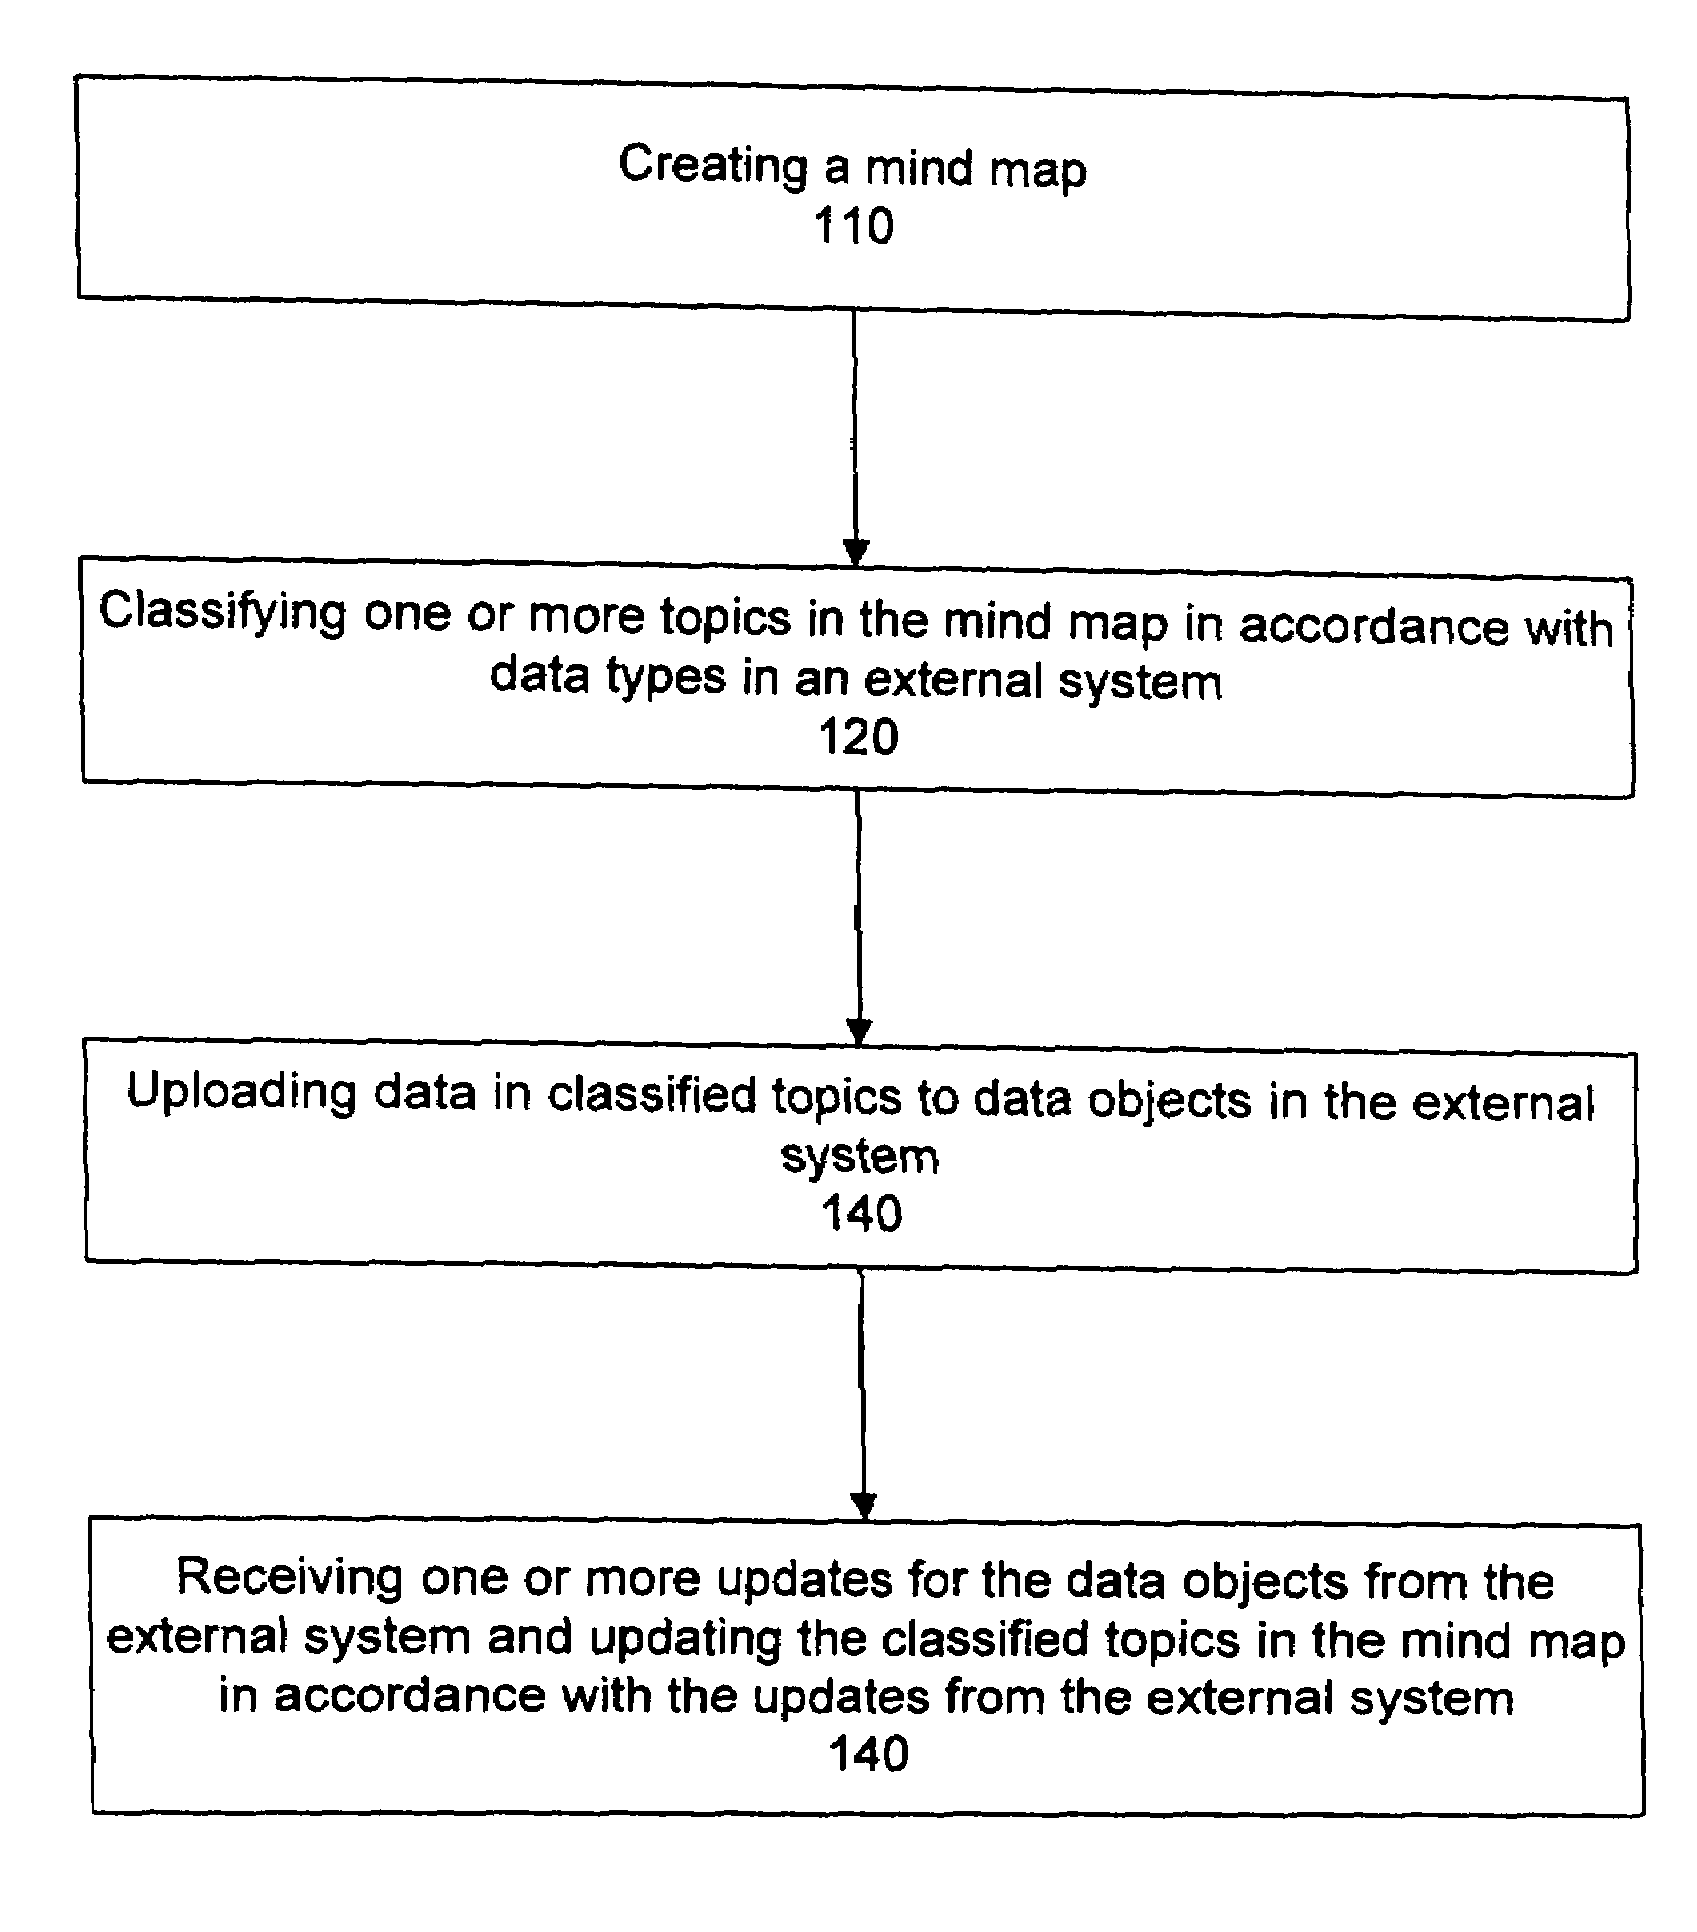 Method for creating and tracking external system data via a mind map